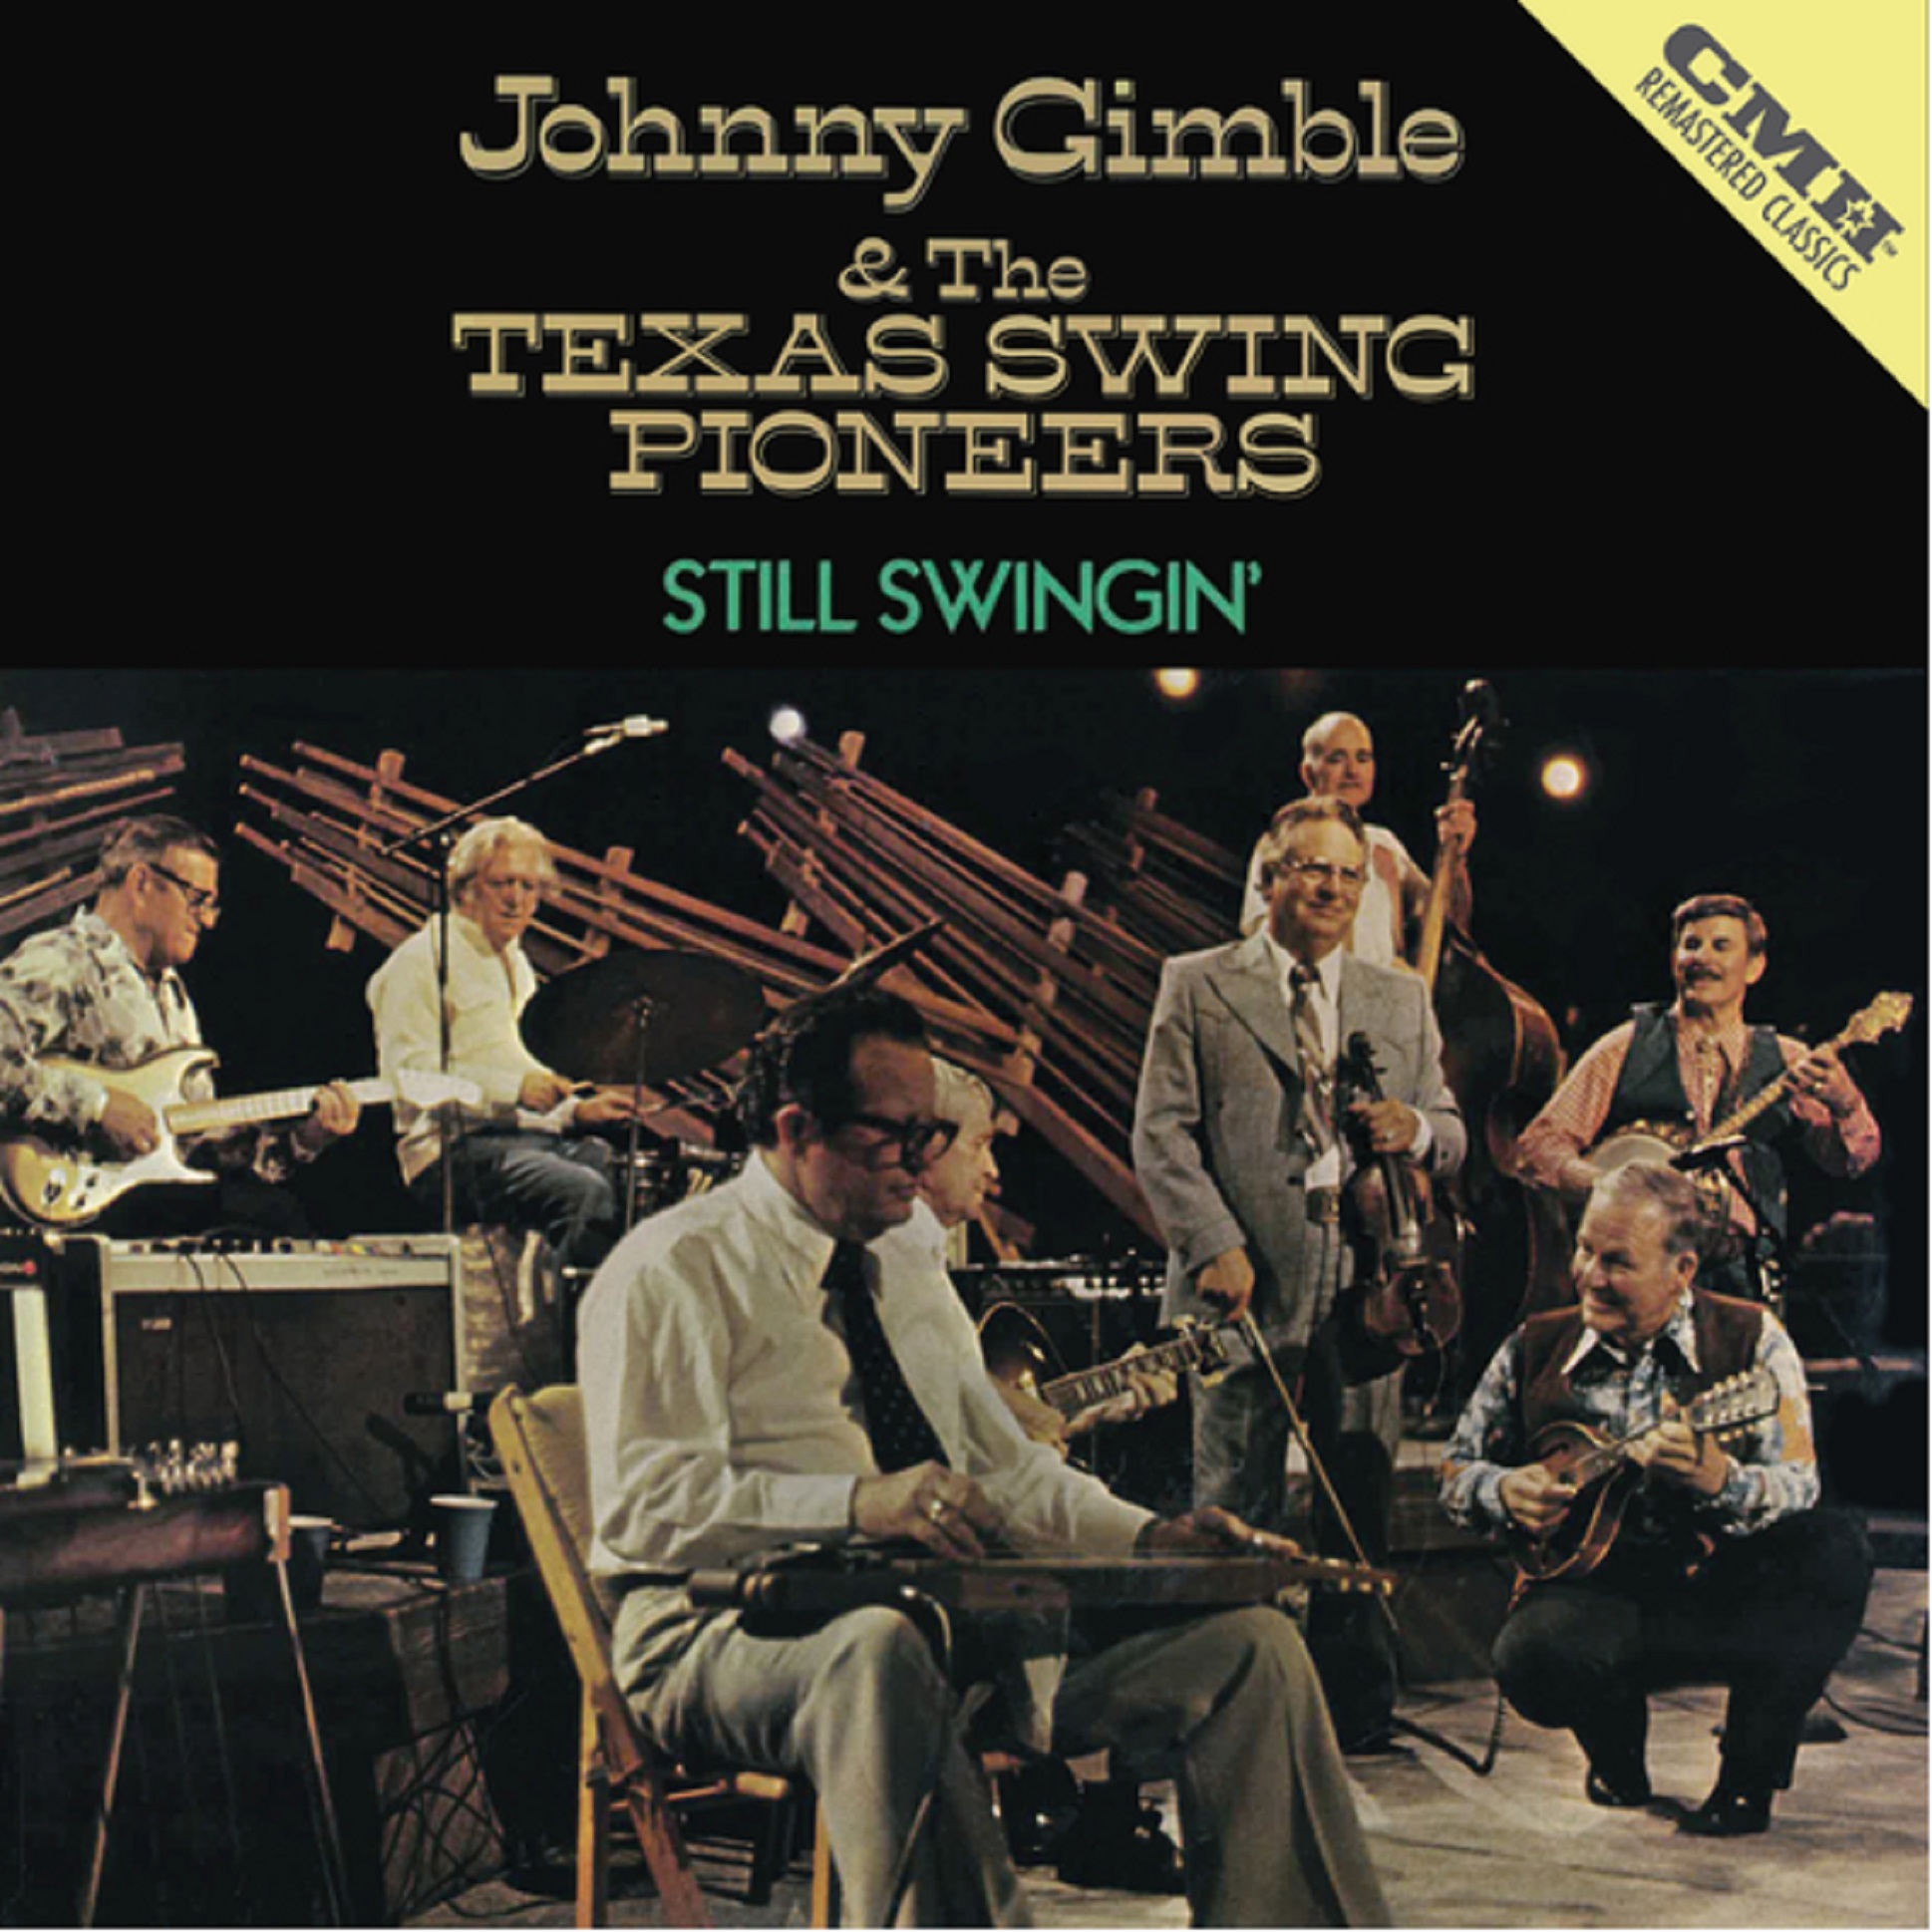 Johnny Gimble & The Texas Swing Pioneers’ ‘Still Swingin’’ Out May 17 On Digital via CMH Records; First Single out Today (5/3)